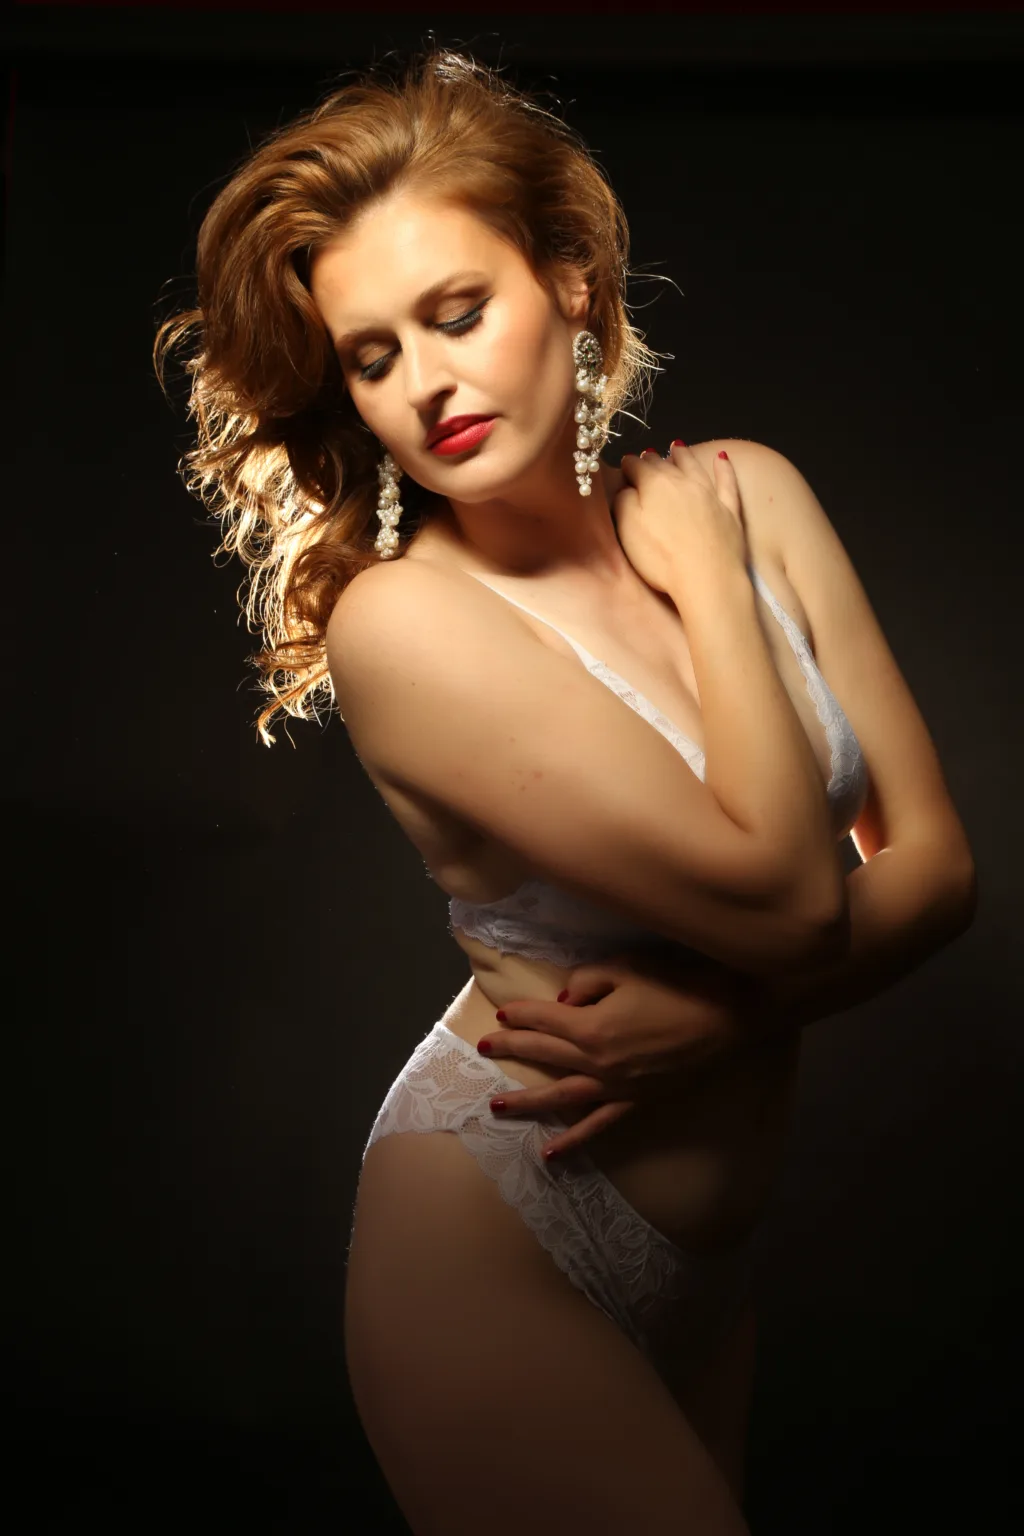 boudoir photoshoot with woman in white lingerie posing in front of dark wall and studio lights